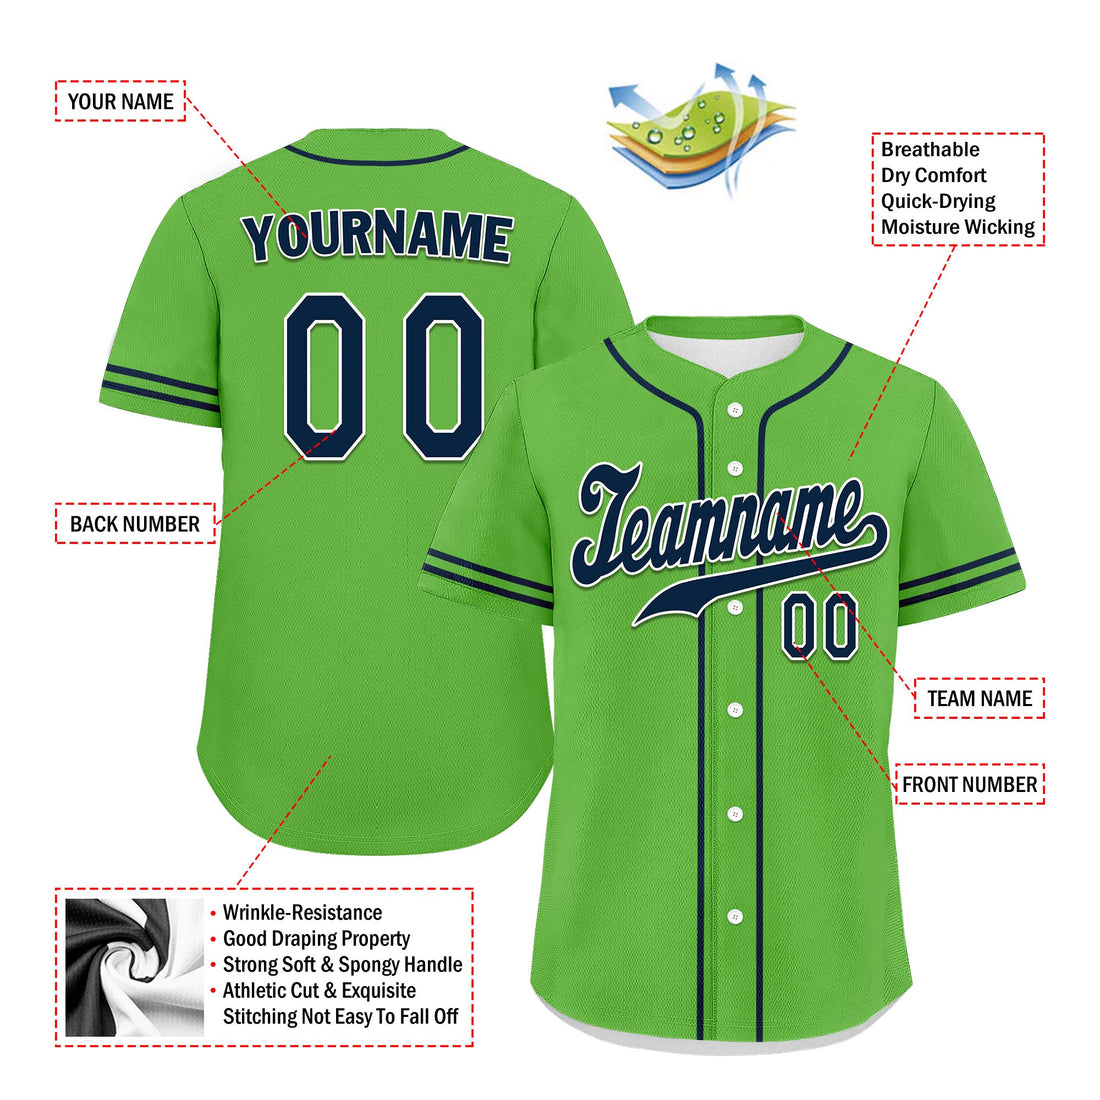 Custom Green Classic Style Blue Personalized Authentic Baseball Jersey UN002-bd0b00d8-ae